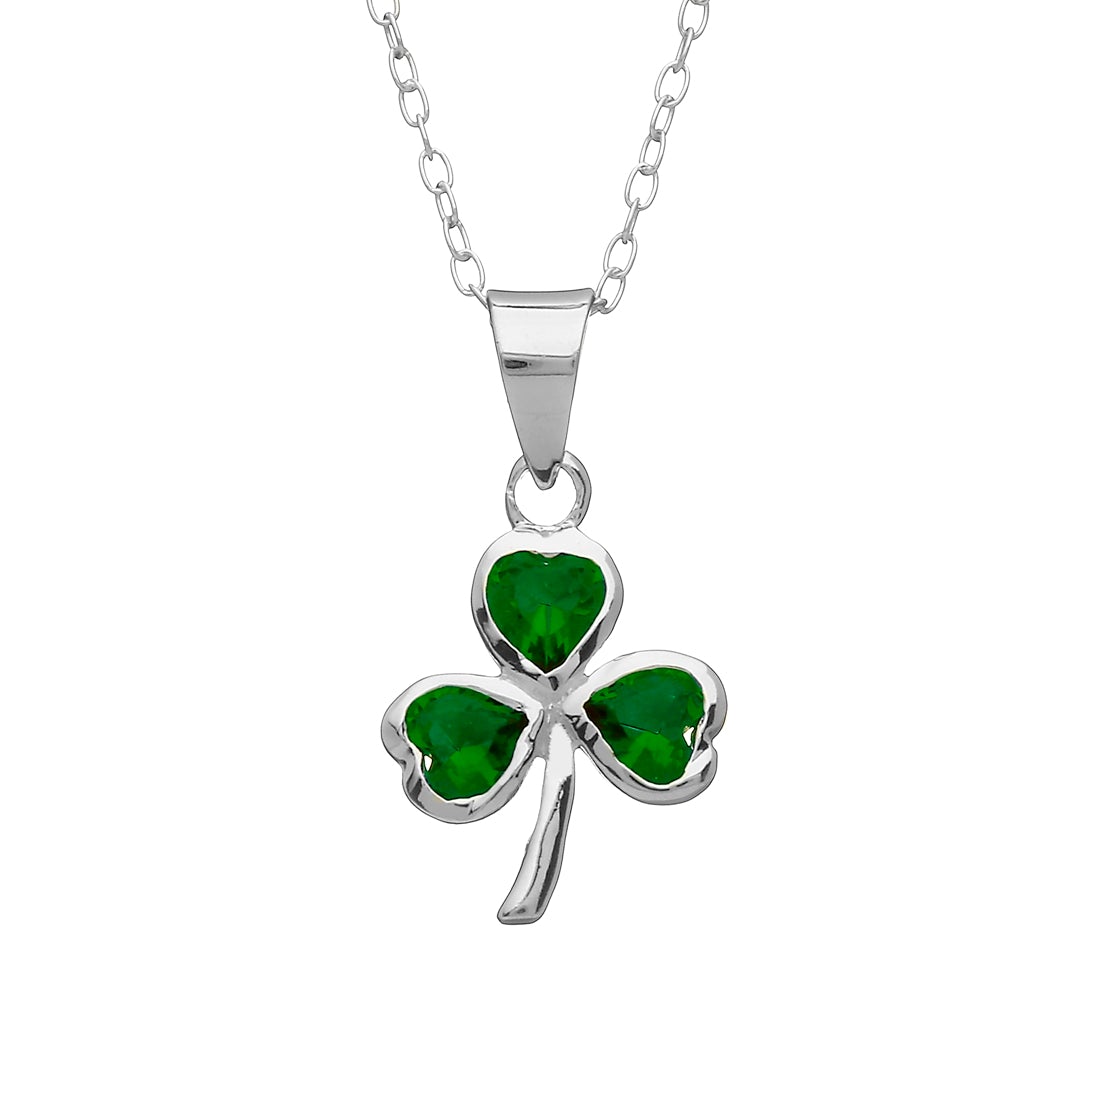 Green Shamrock Pendant - Glass and Sterling Silver